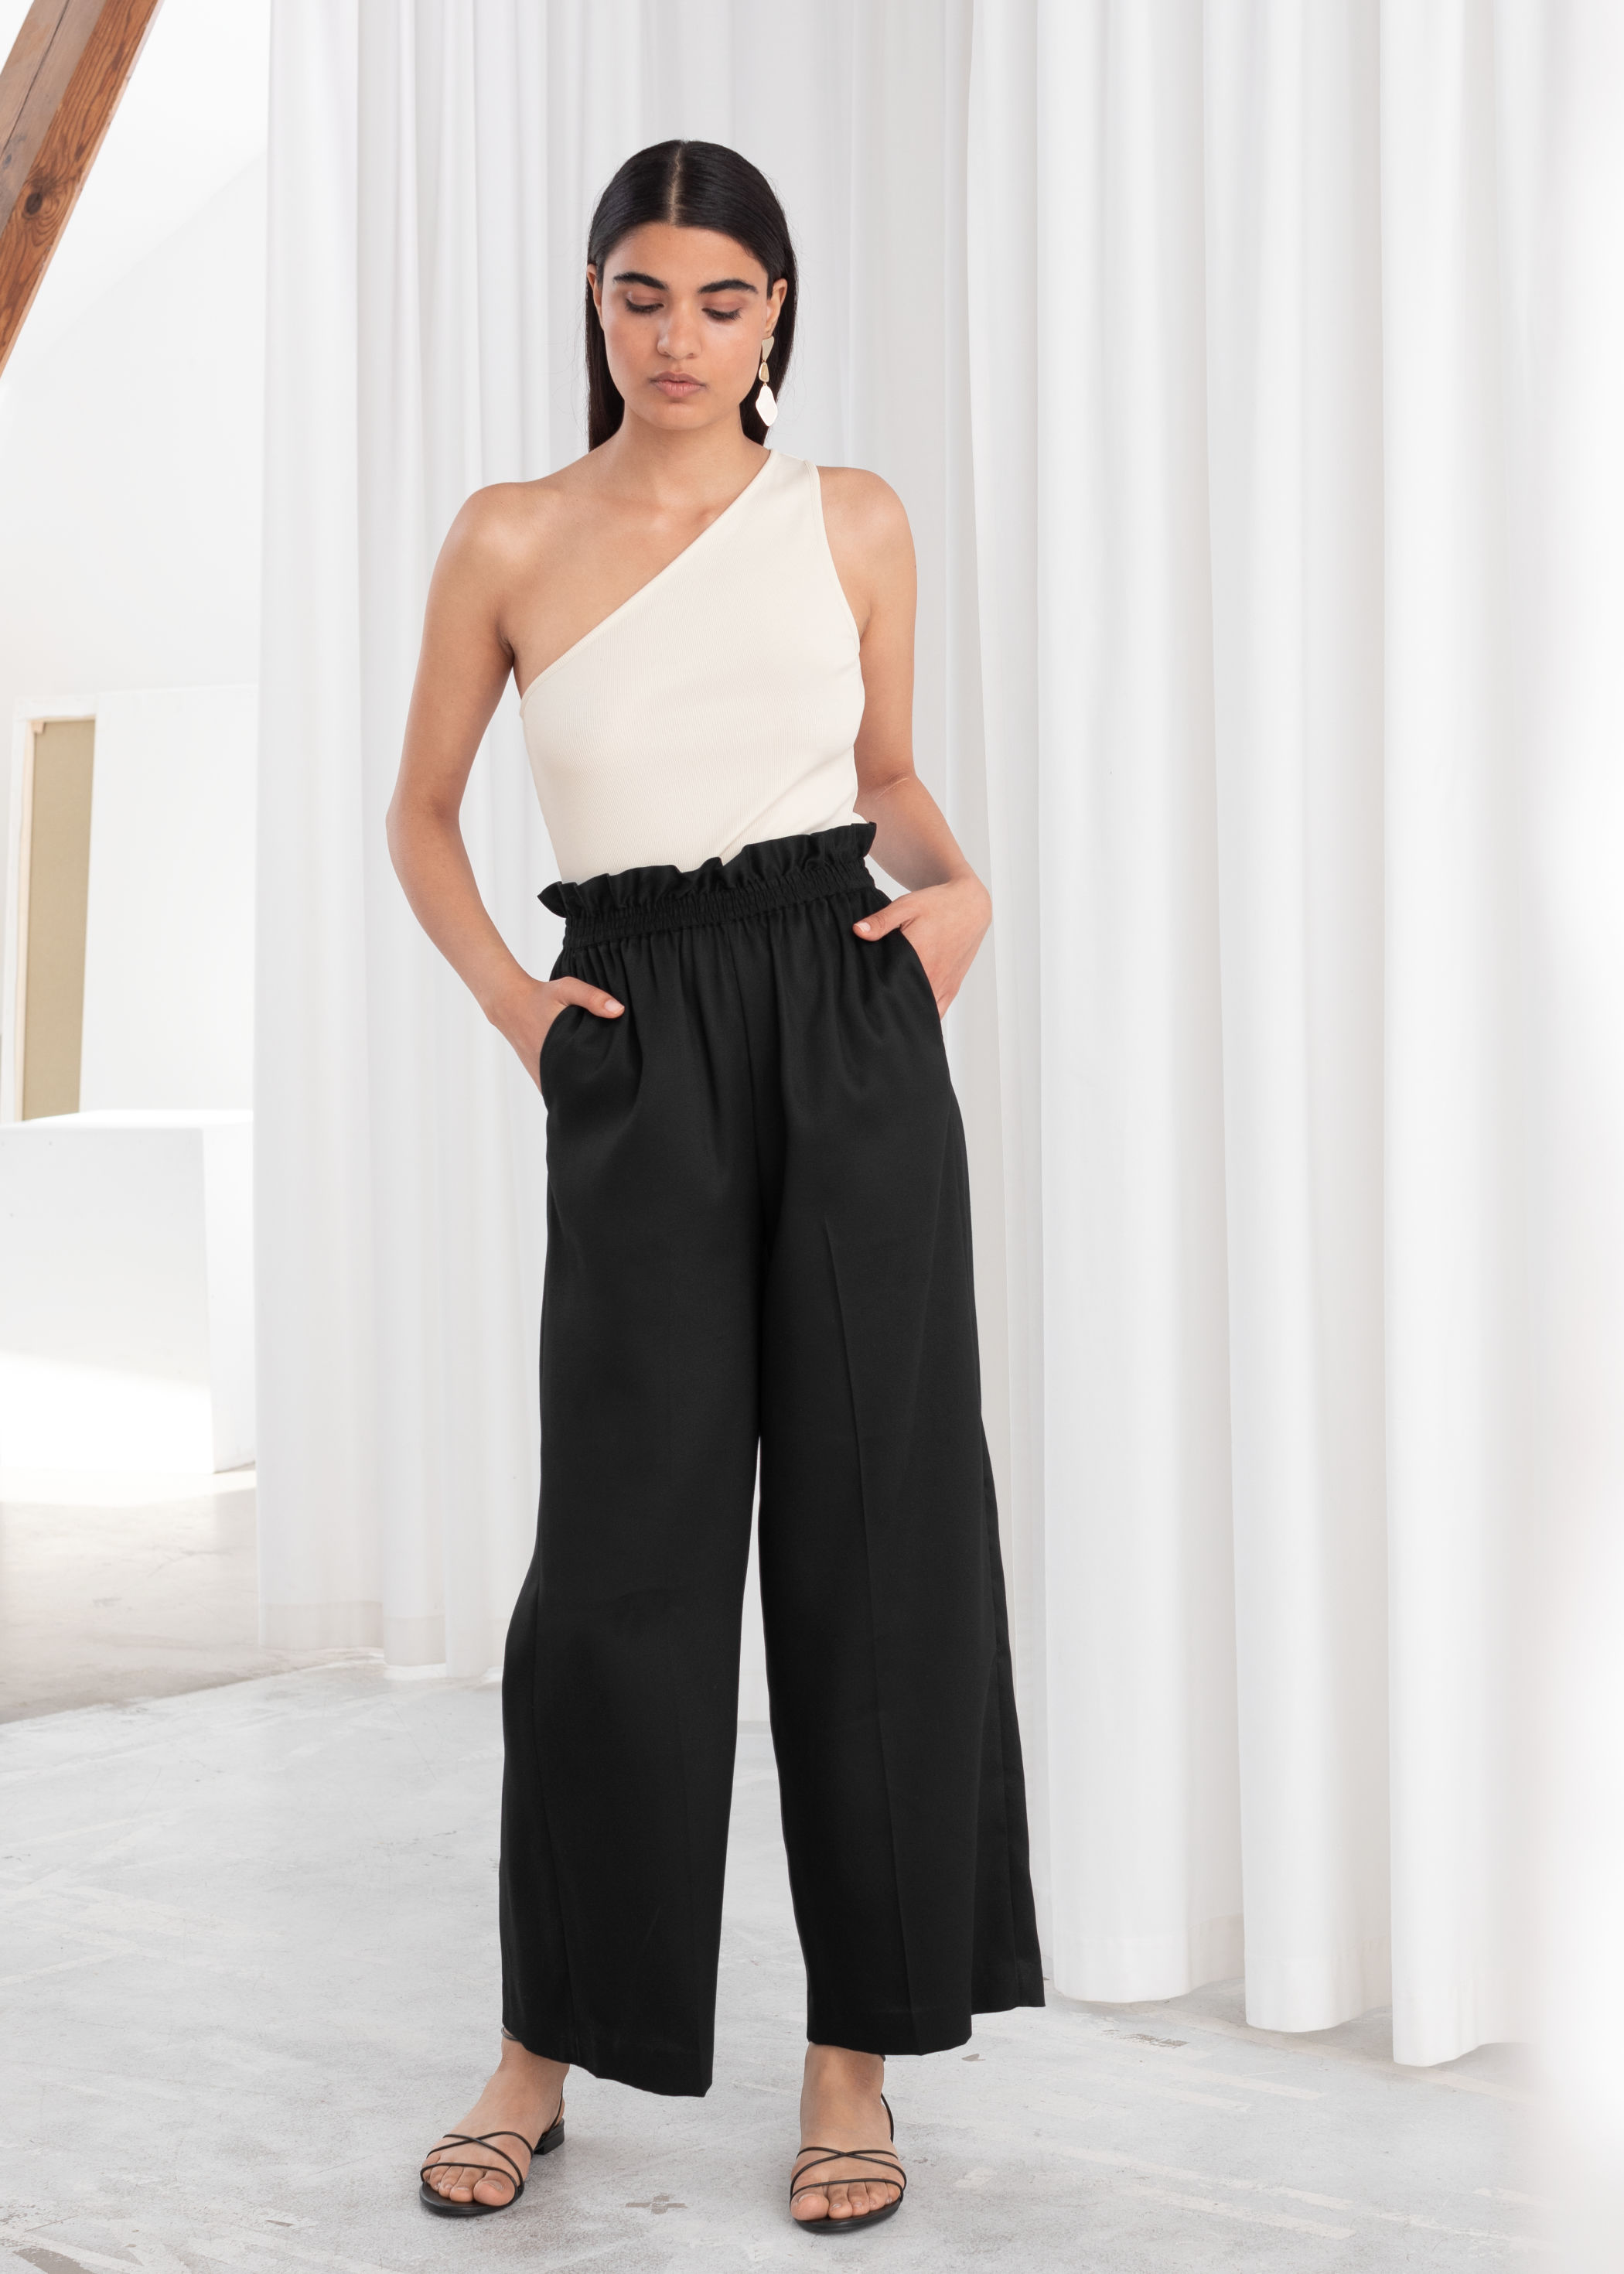 & Other Stories Twill Paper Bag Waist Pants